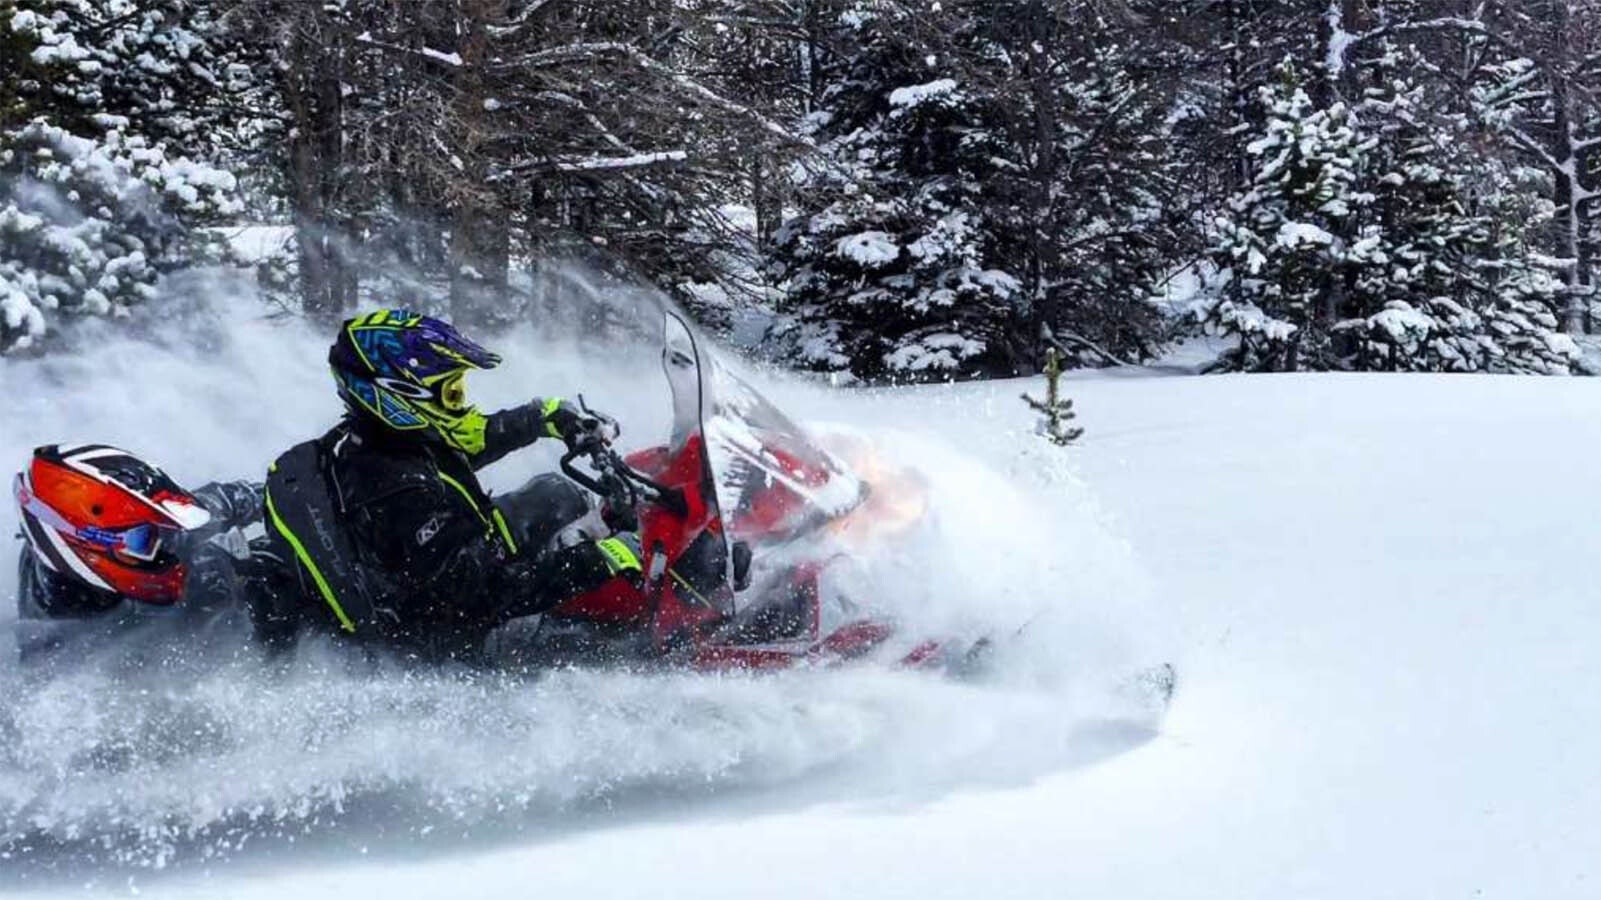 Wyoming's Snowy Range offers some of the nation's best snowmobiling.